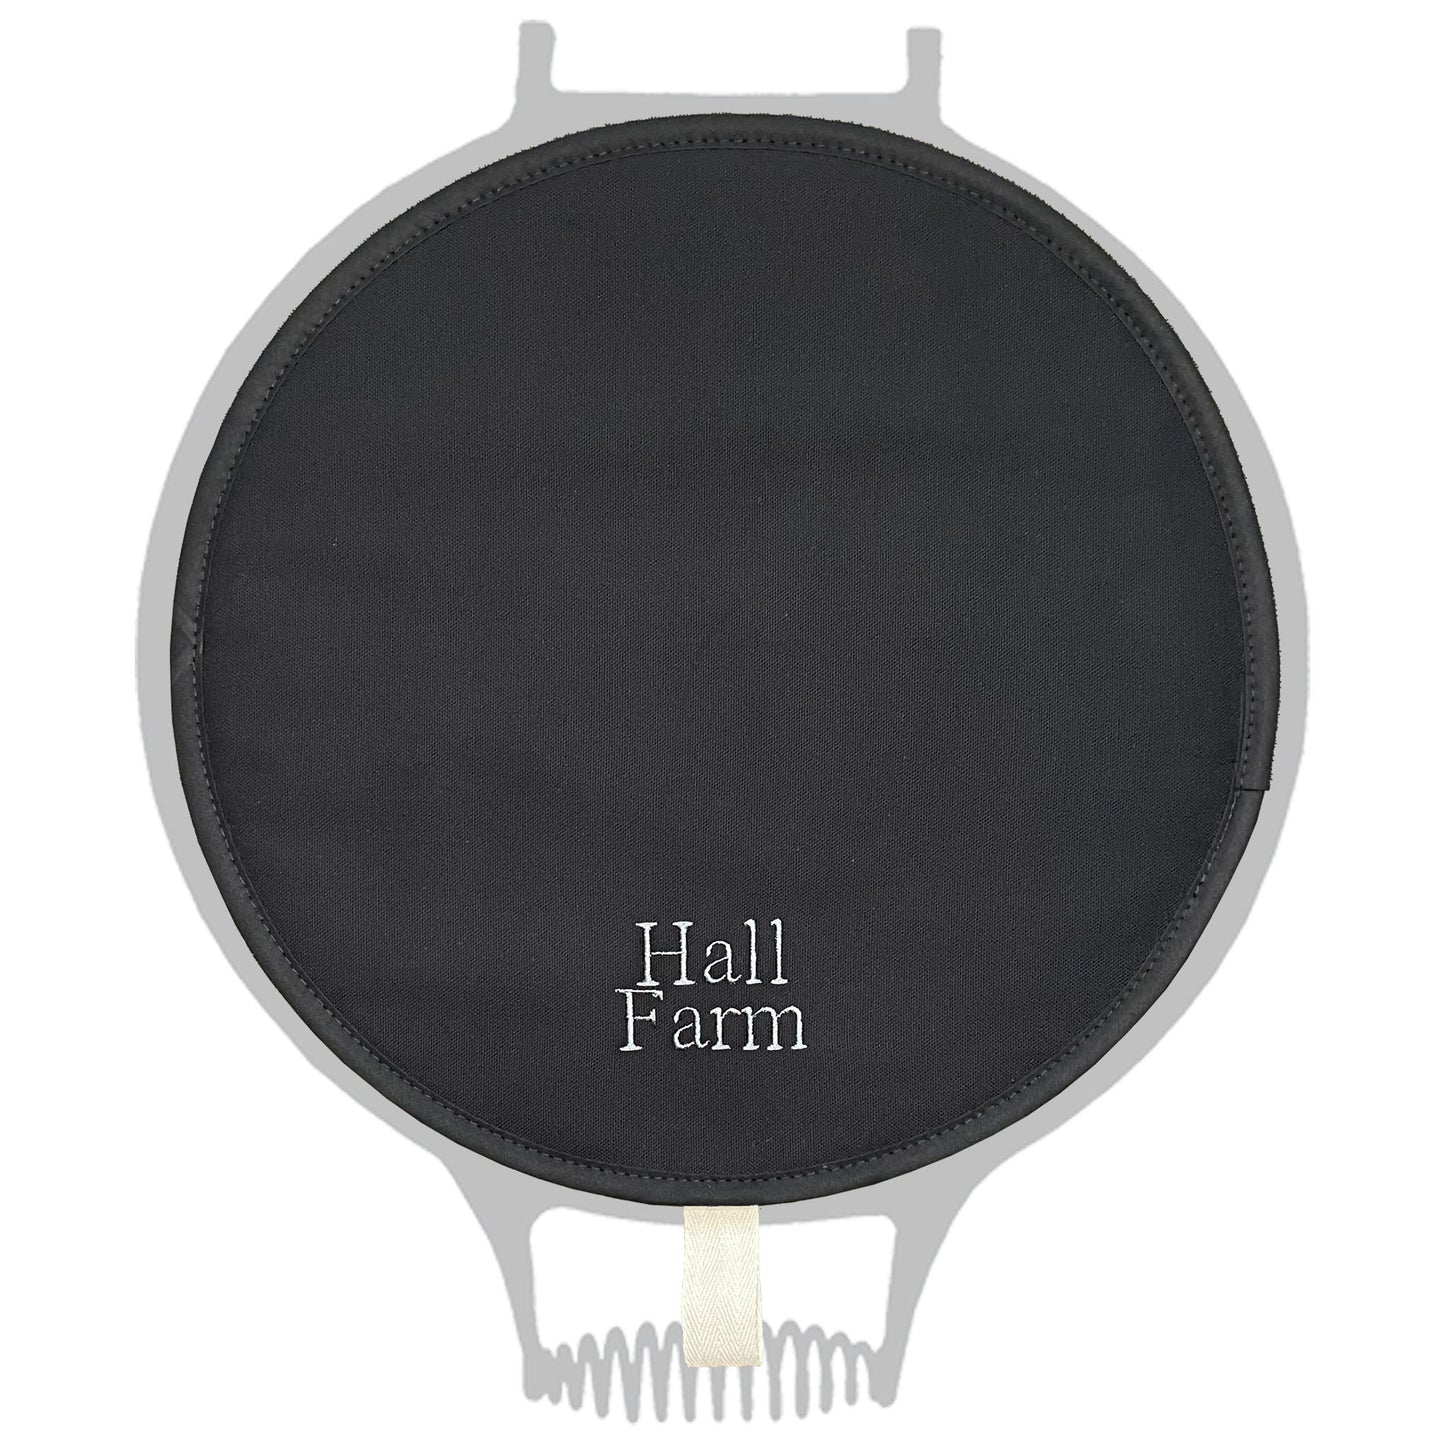 Personalised Names Chefs Pad in Plain Black for use with AGA range cooker